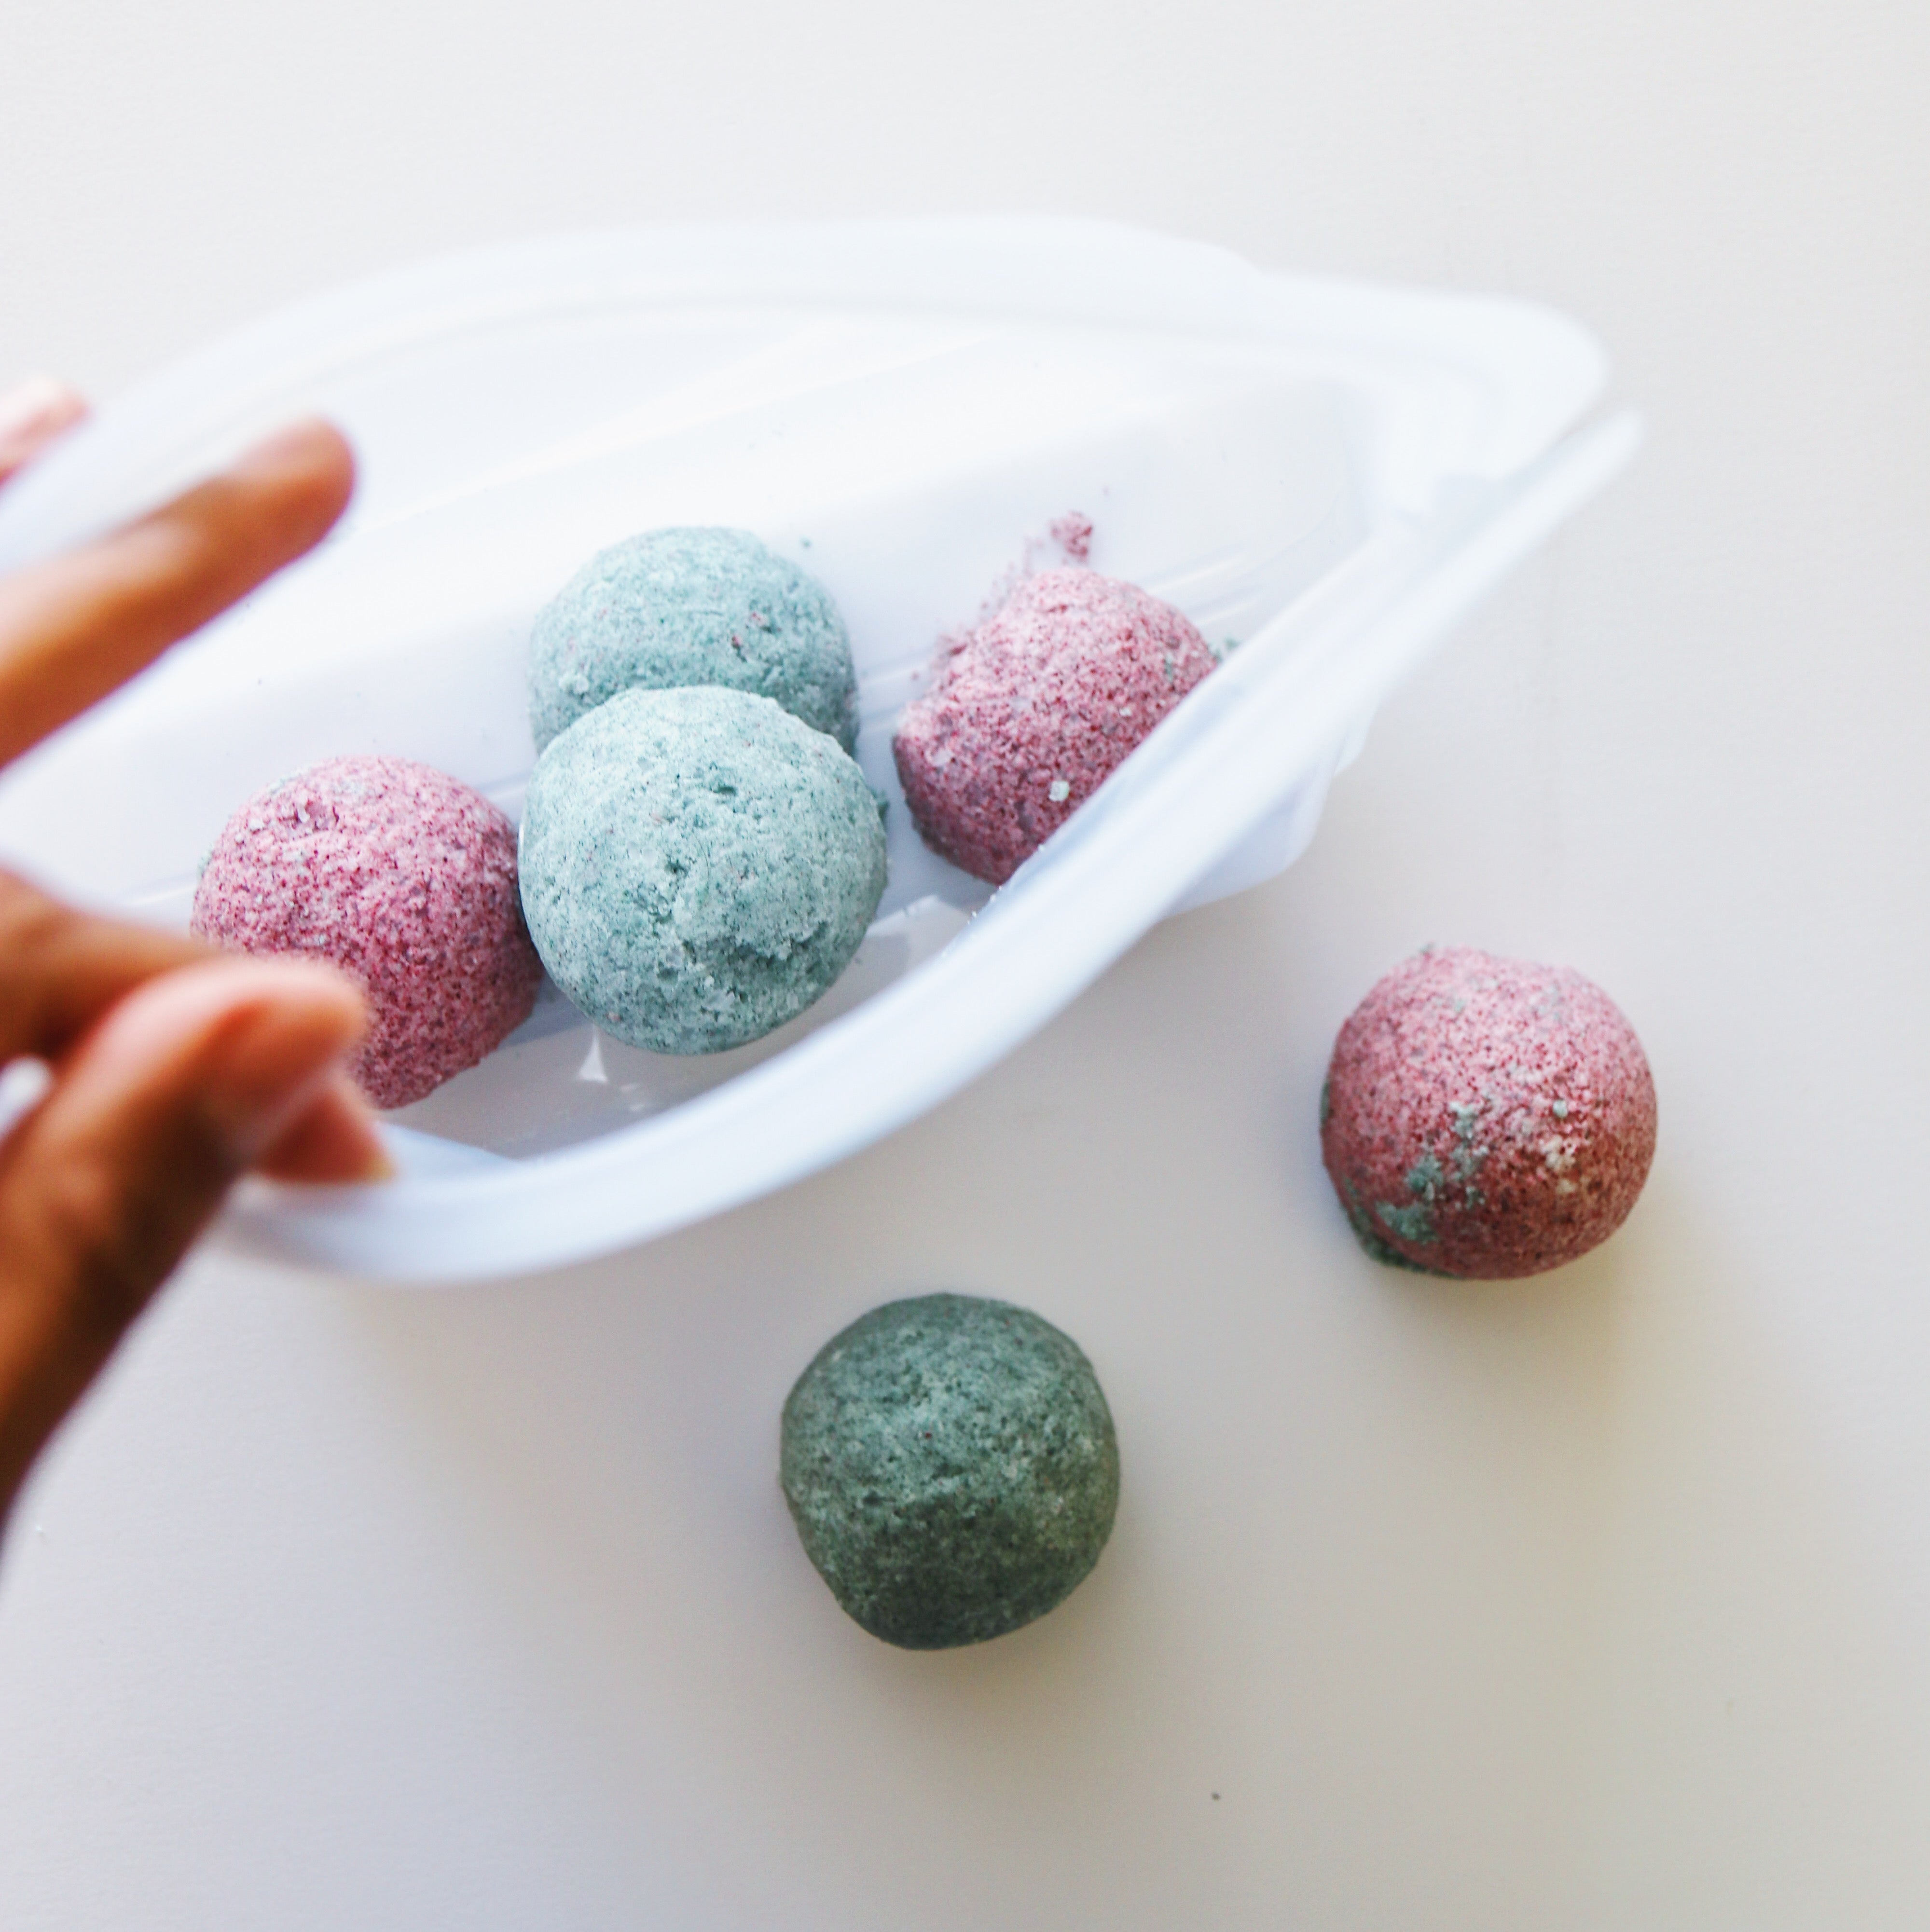 Cheaper and Better: DIY bathtub fizzies for kids